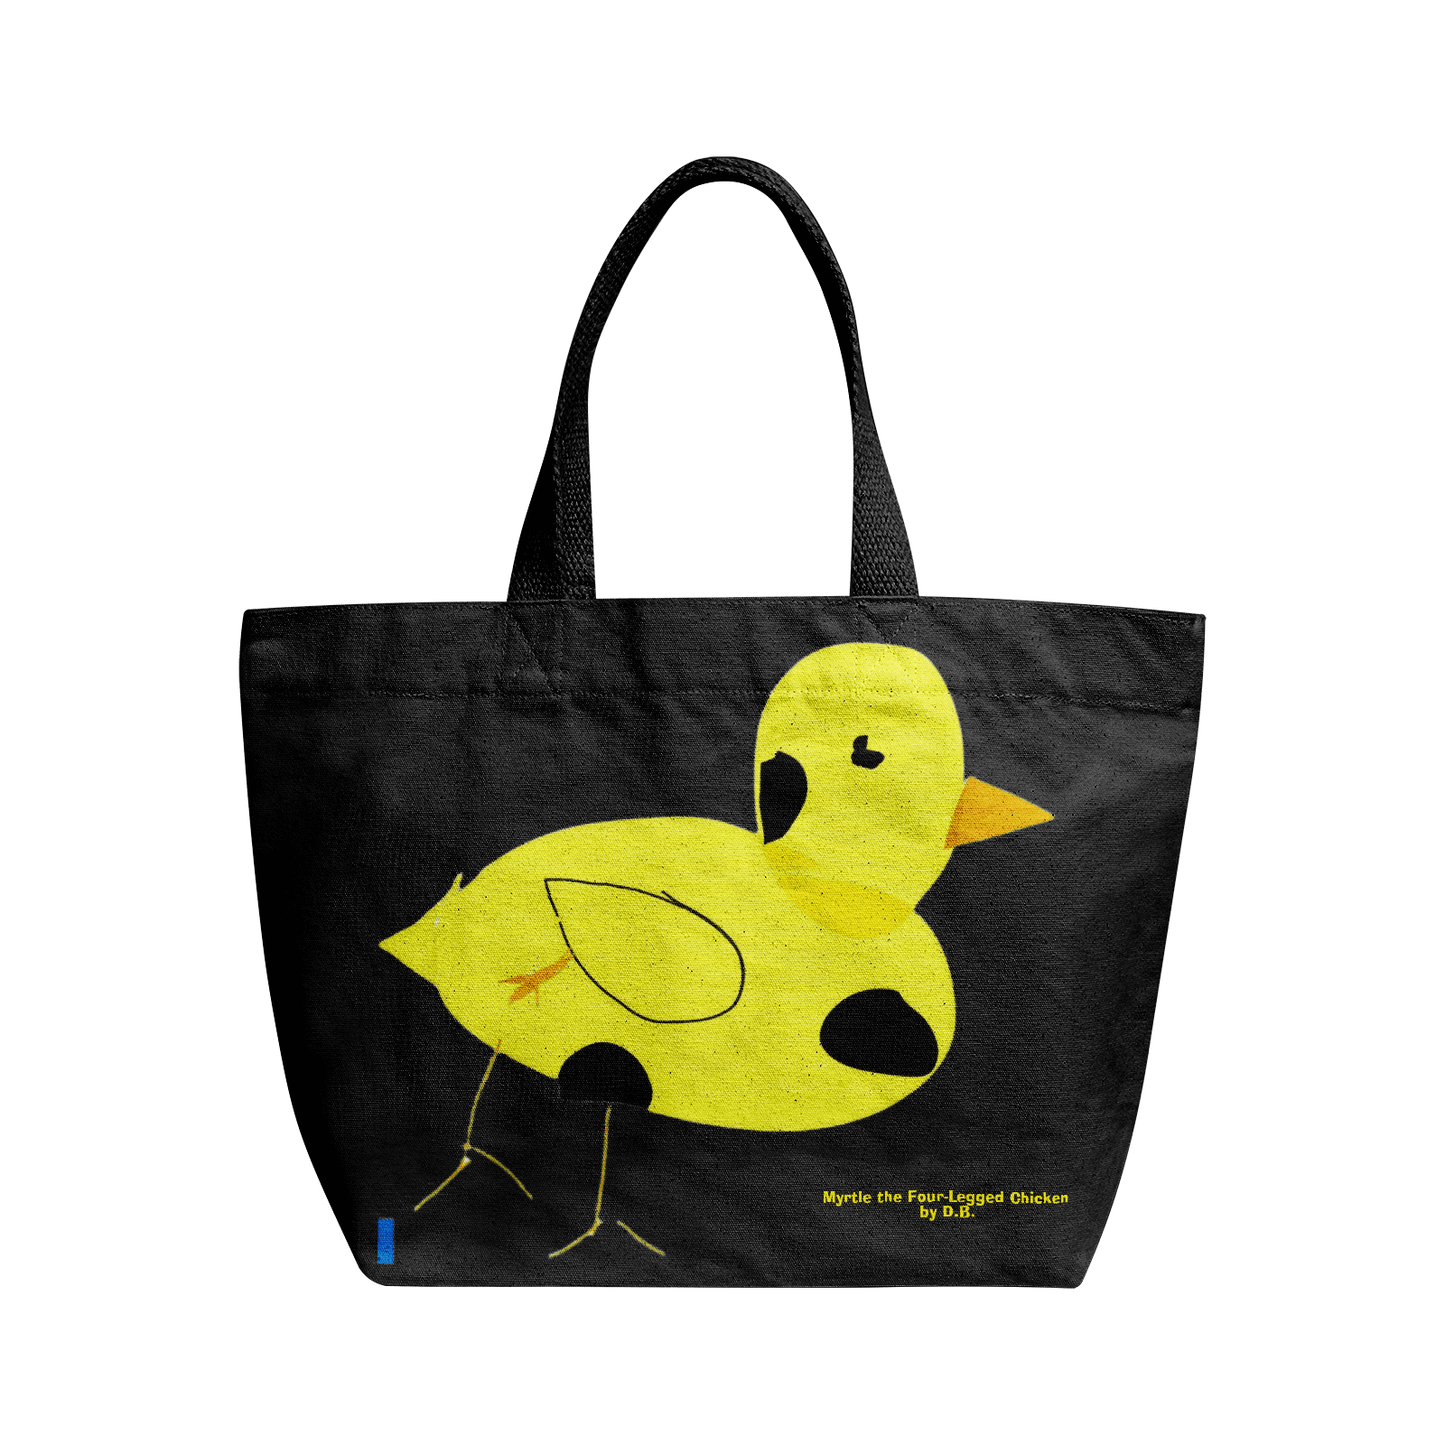 Heavy Duty and Strong Natural Canvas Tote Bags in black with Myrtle the Four-Legged Chicken by D.B. print